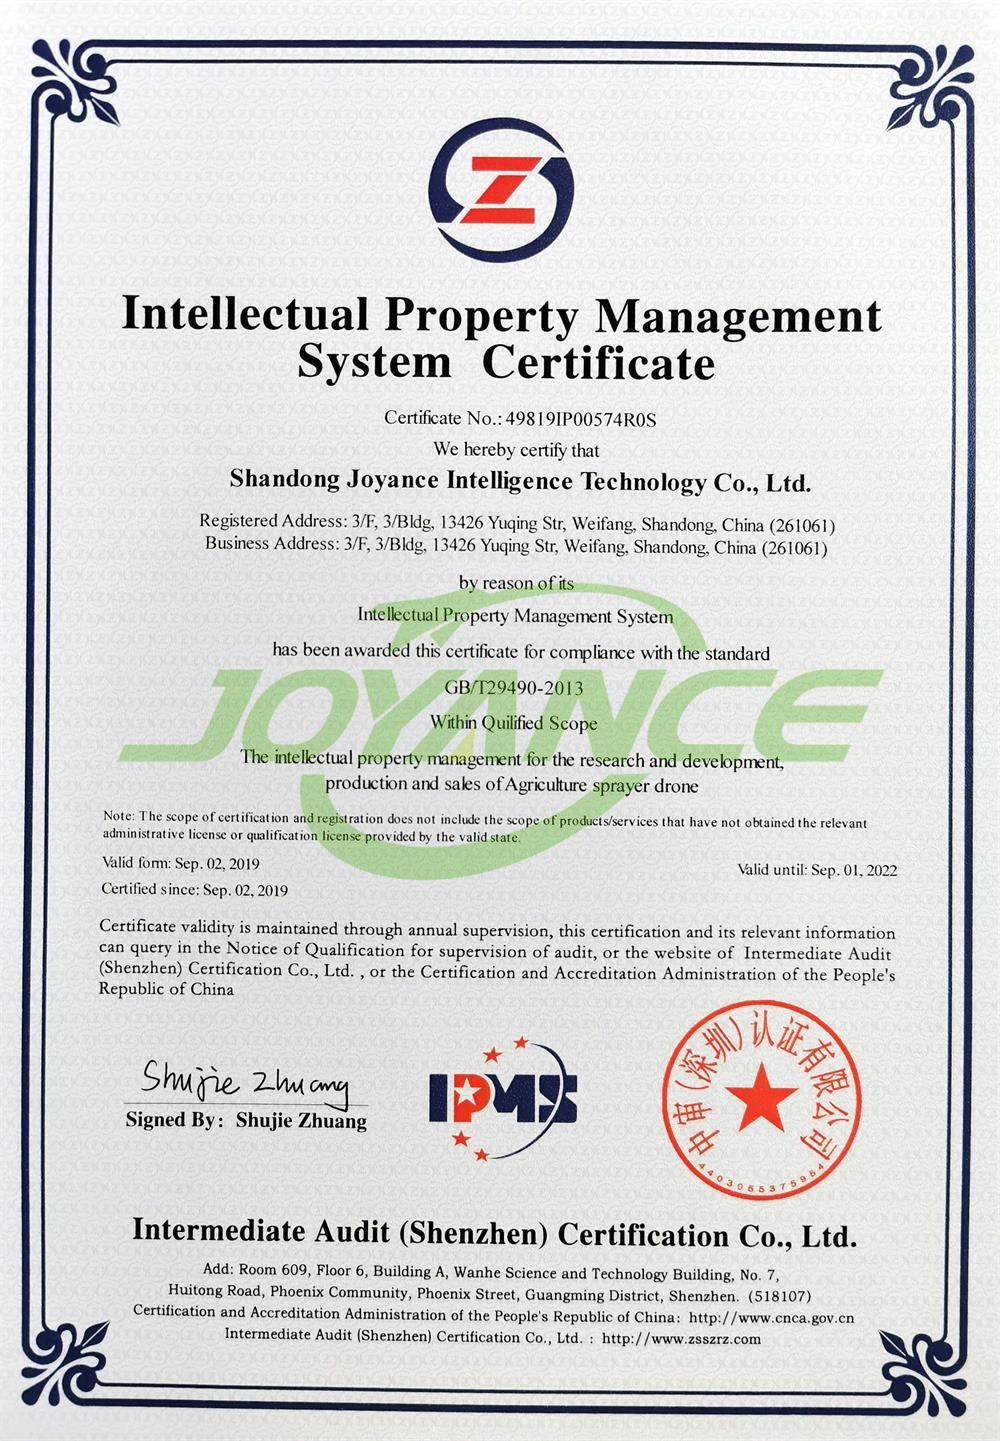 Intellectual Property Management System Certificate-drone agriculture sprayer, agriculture drone sprayer, sprayer drone, UAV crop duster